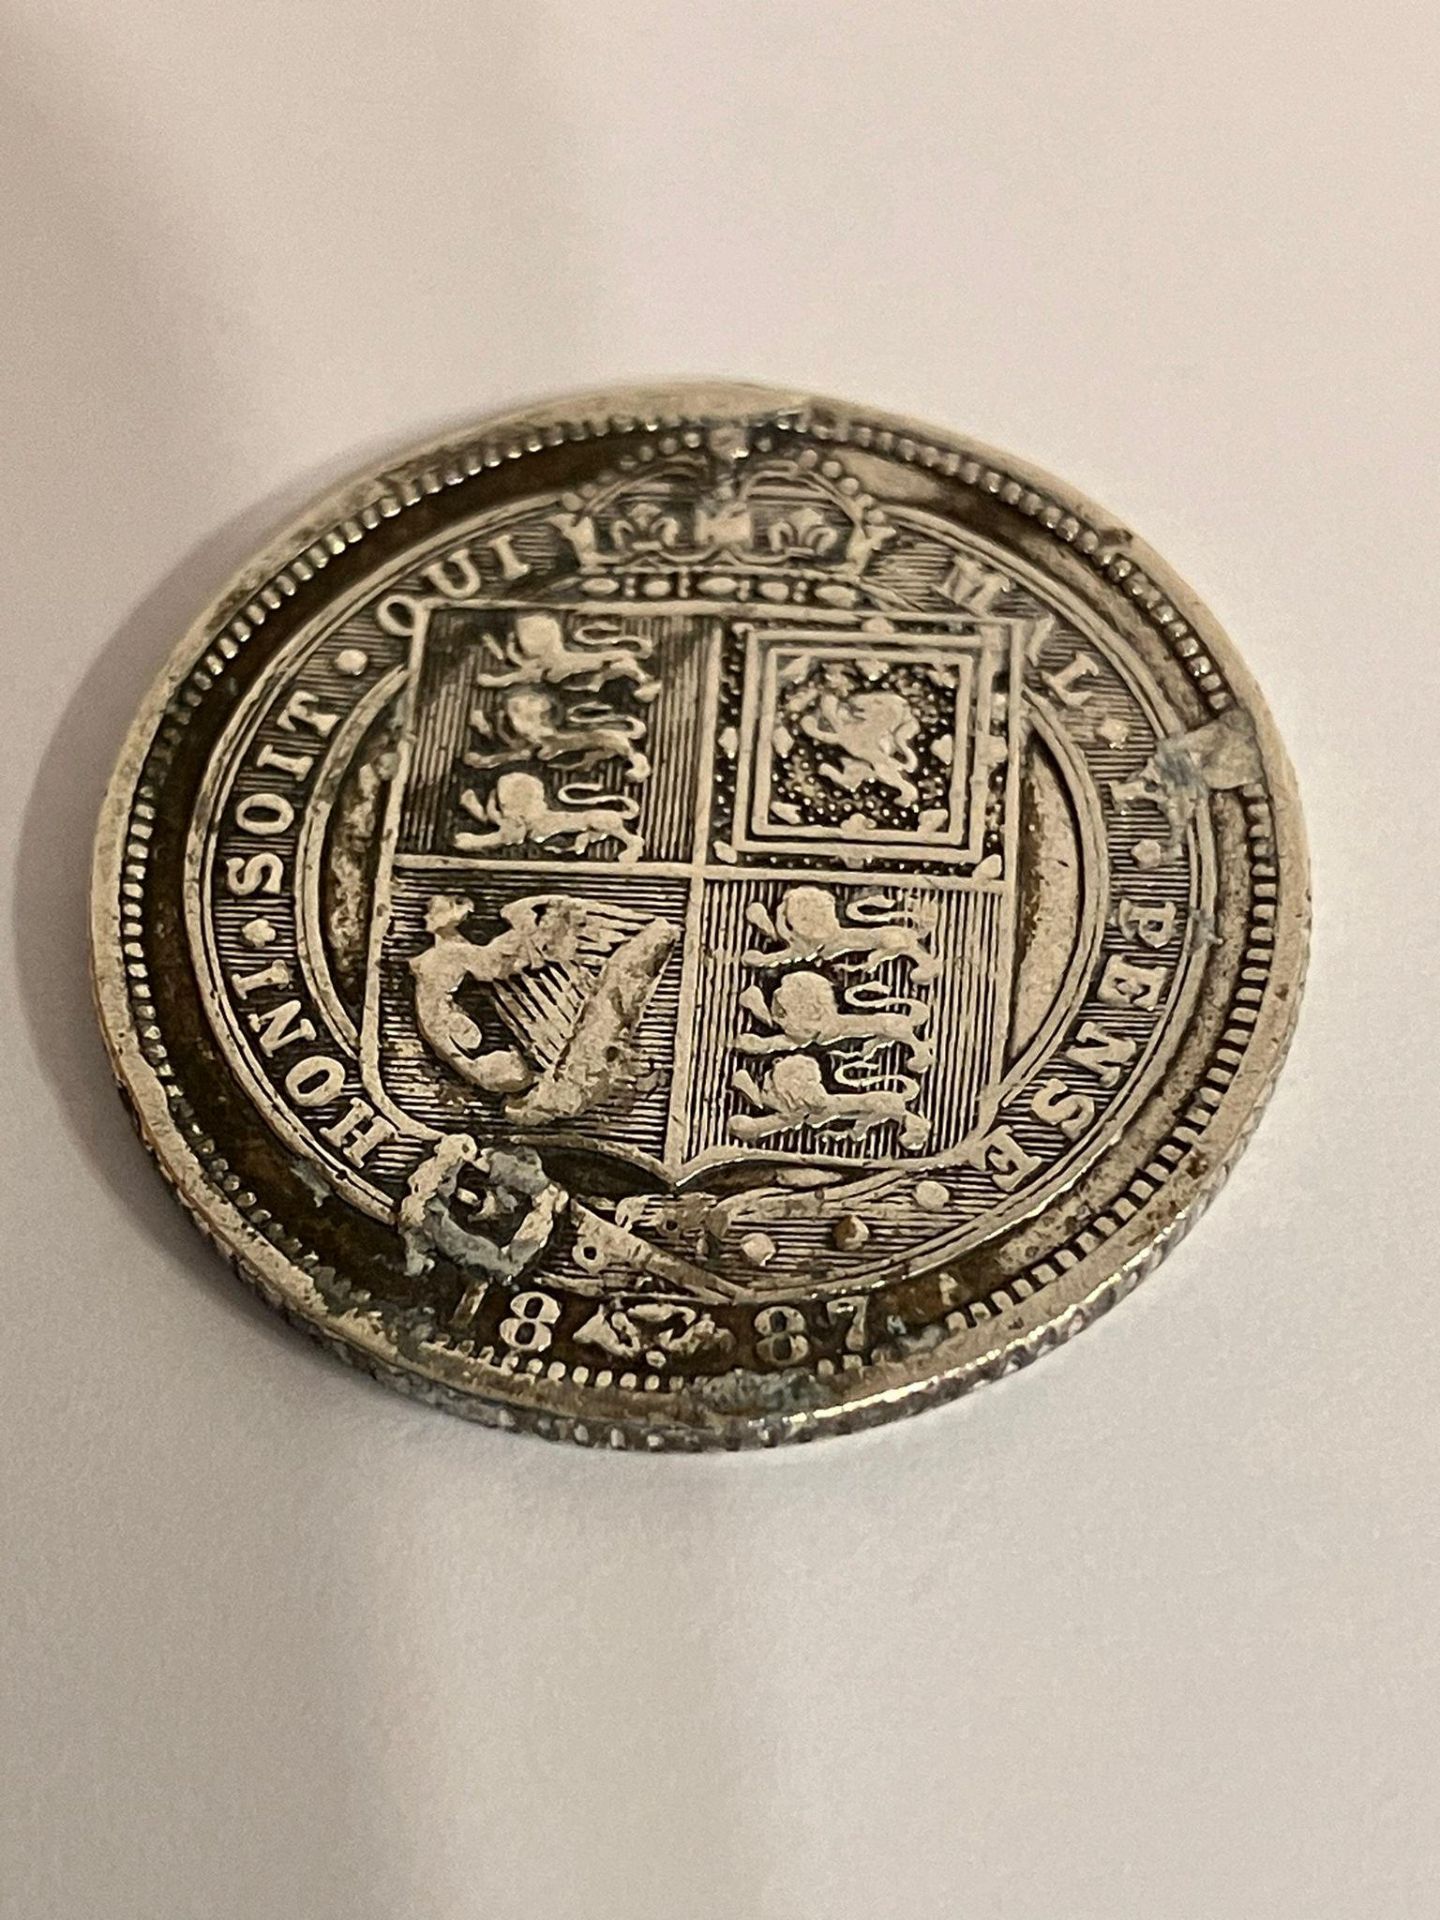 1887 SILVER SIXPENCE. Fair/fine condition. Queen Victoria Golden Jubilee Mintage. Dirty, Could use a